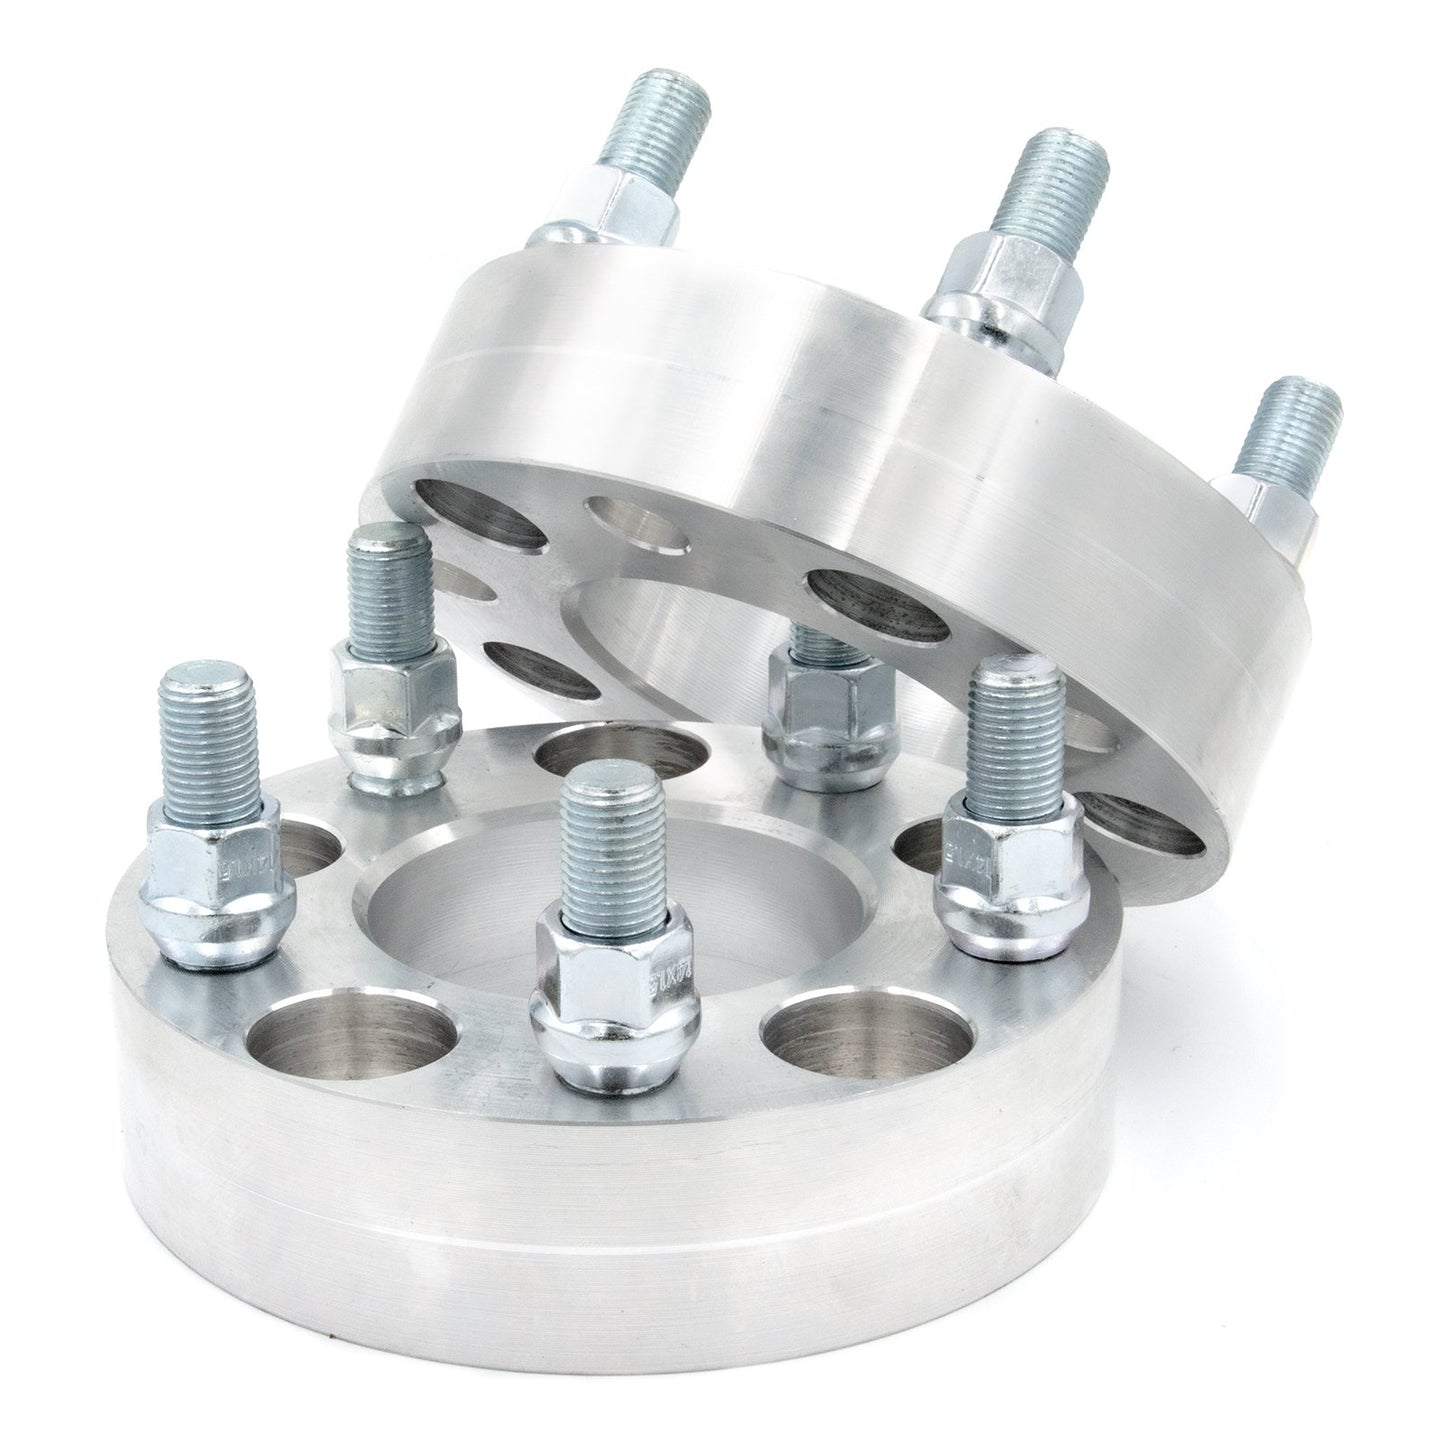 5x110 to 5x100 Wheel Spacer/Adapter - Thickness: 3/4"- 4"